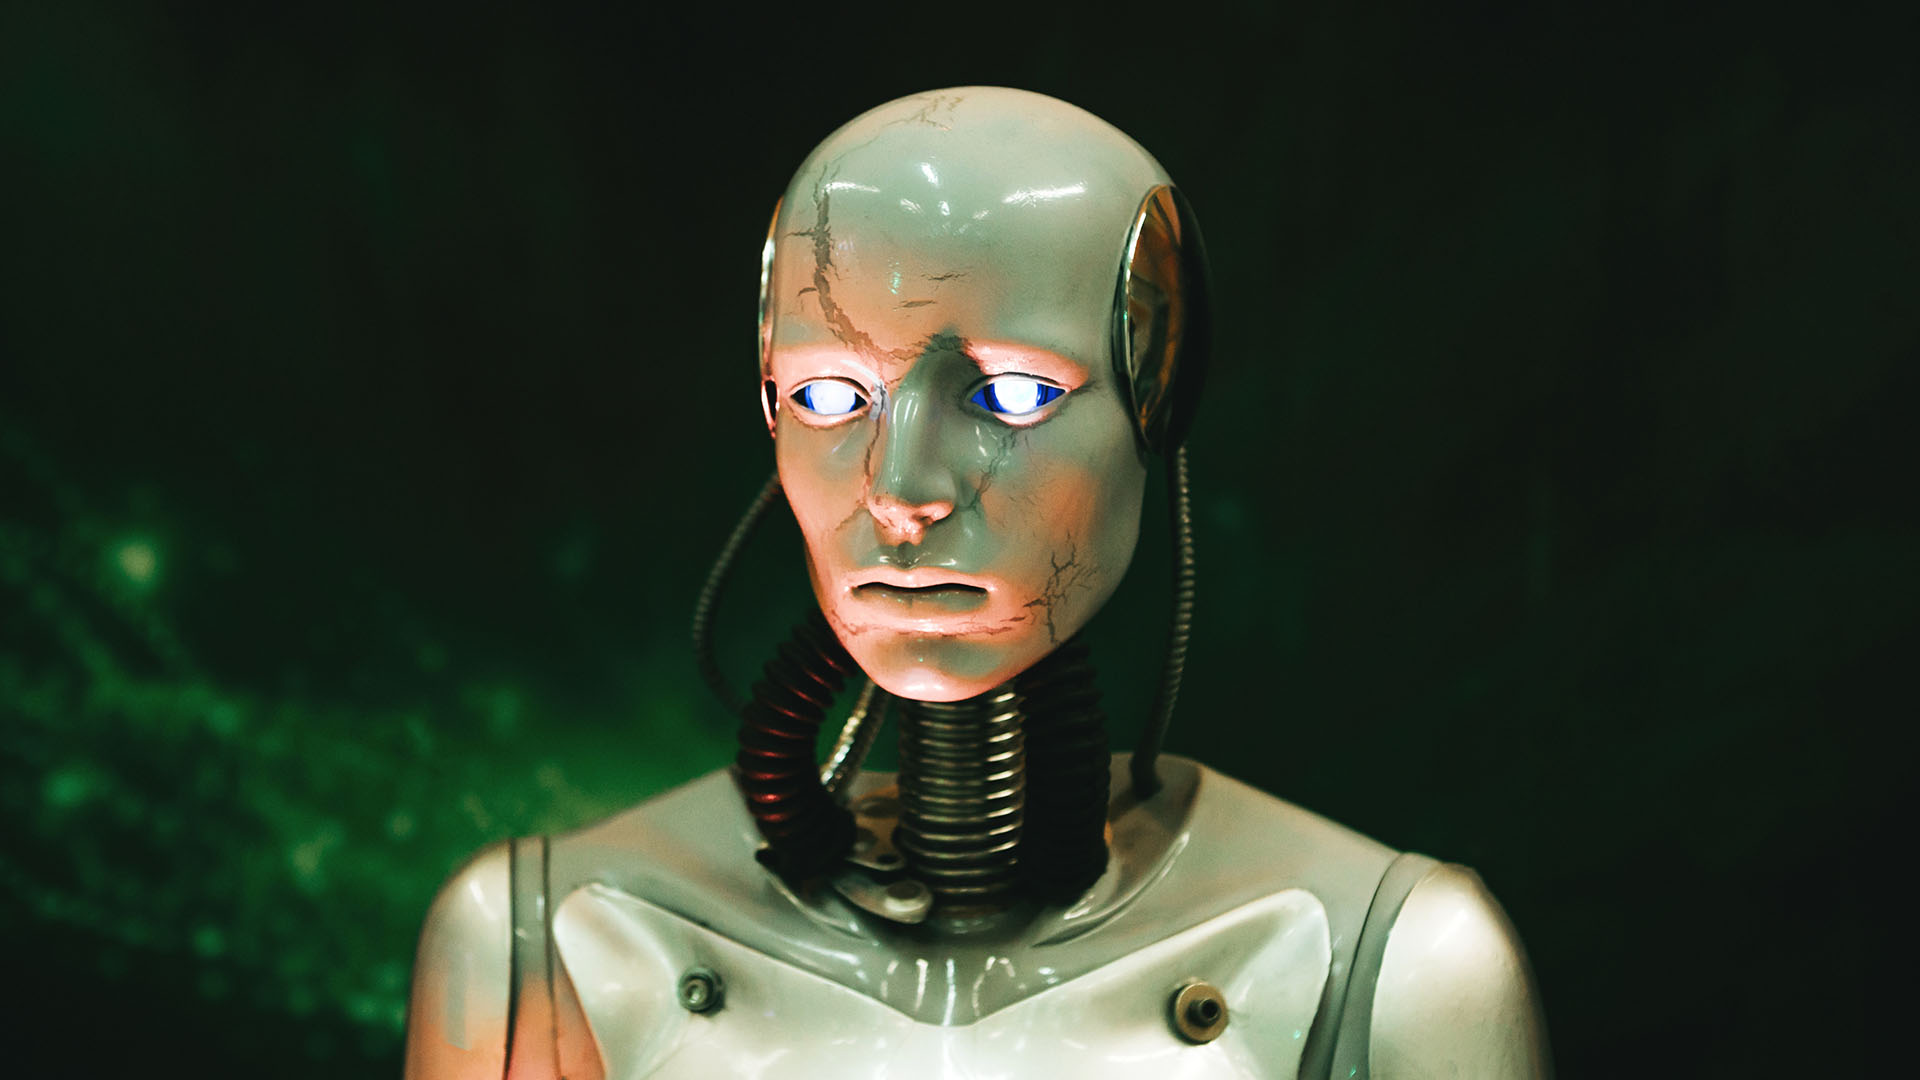 A humanoid robot with glowing blue eyes and a metallic body stands against a dark green background, embodying the Human vs. Machine battle for the newsroom.